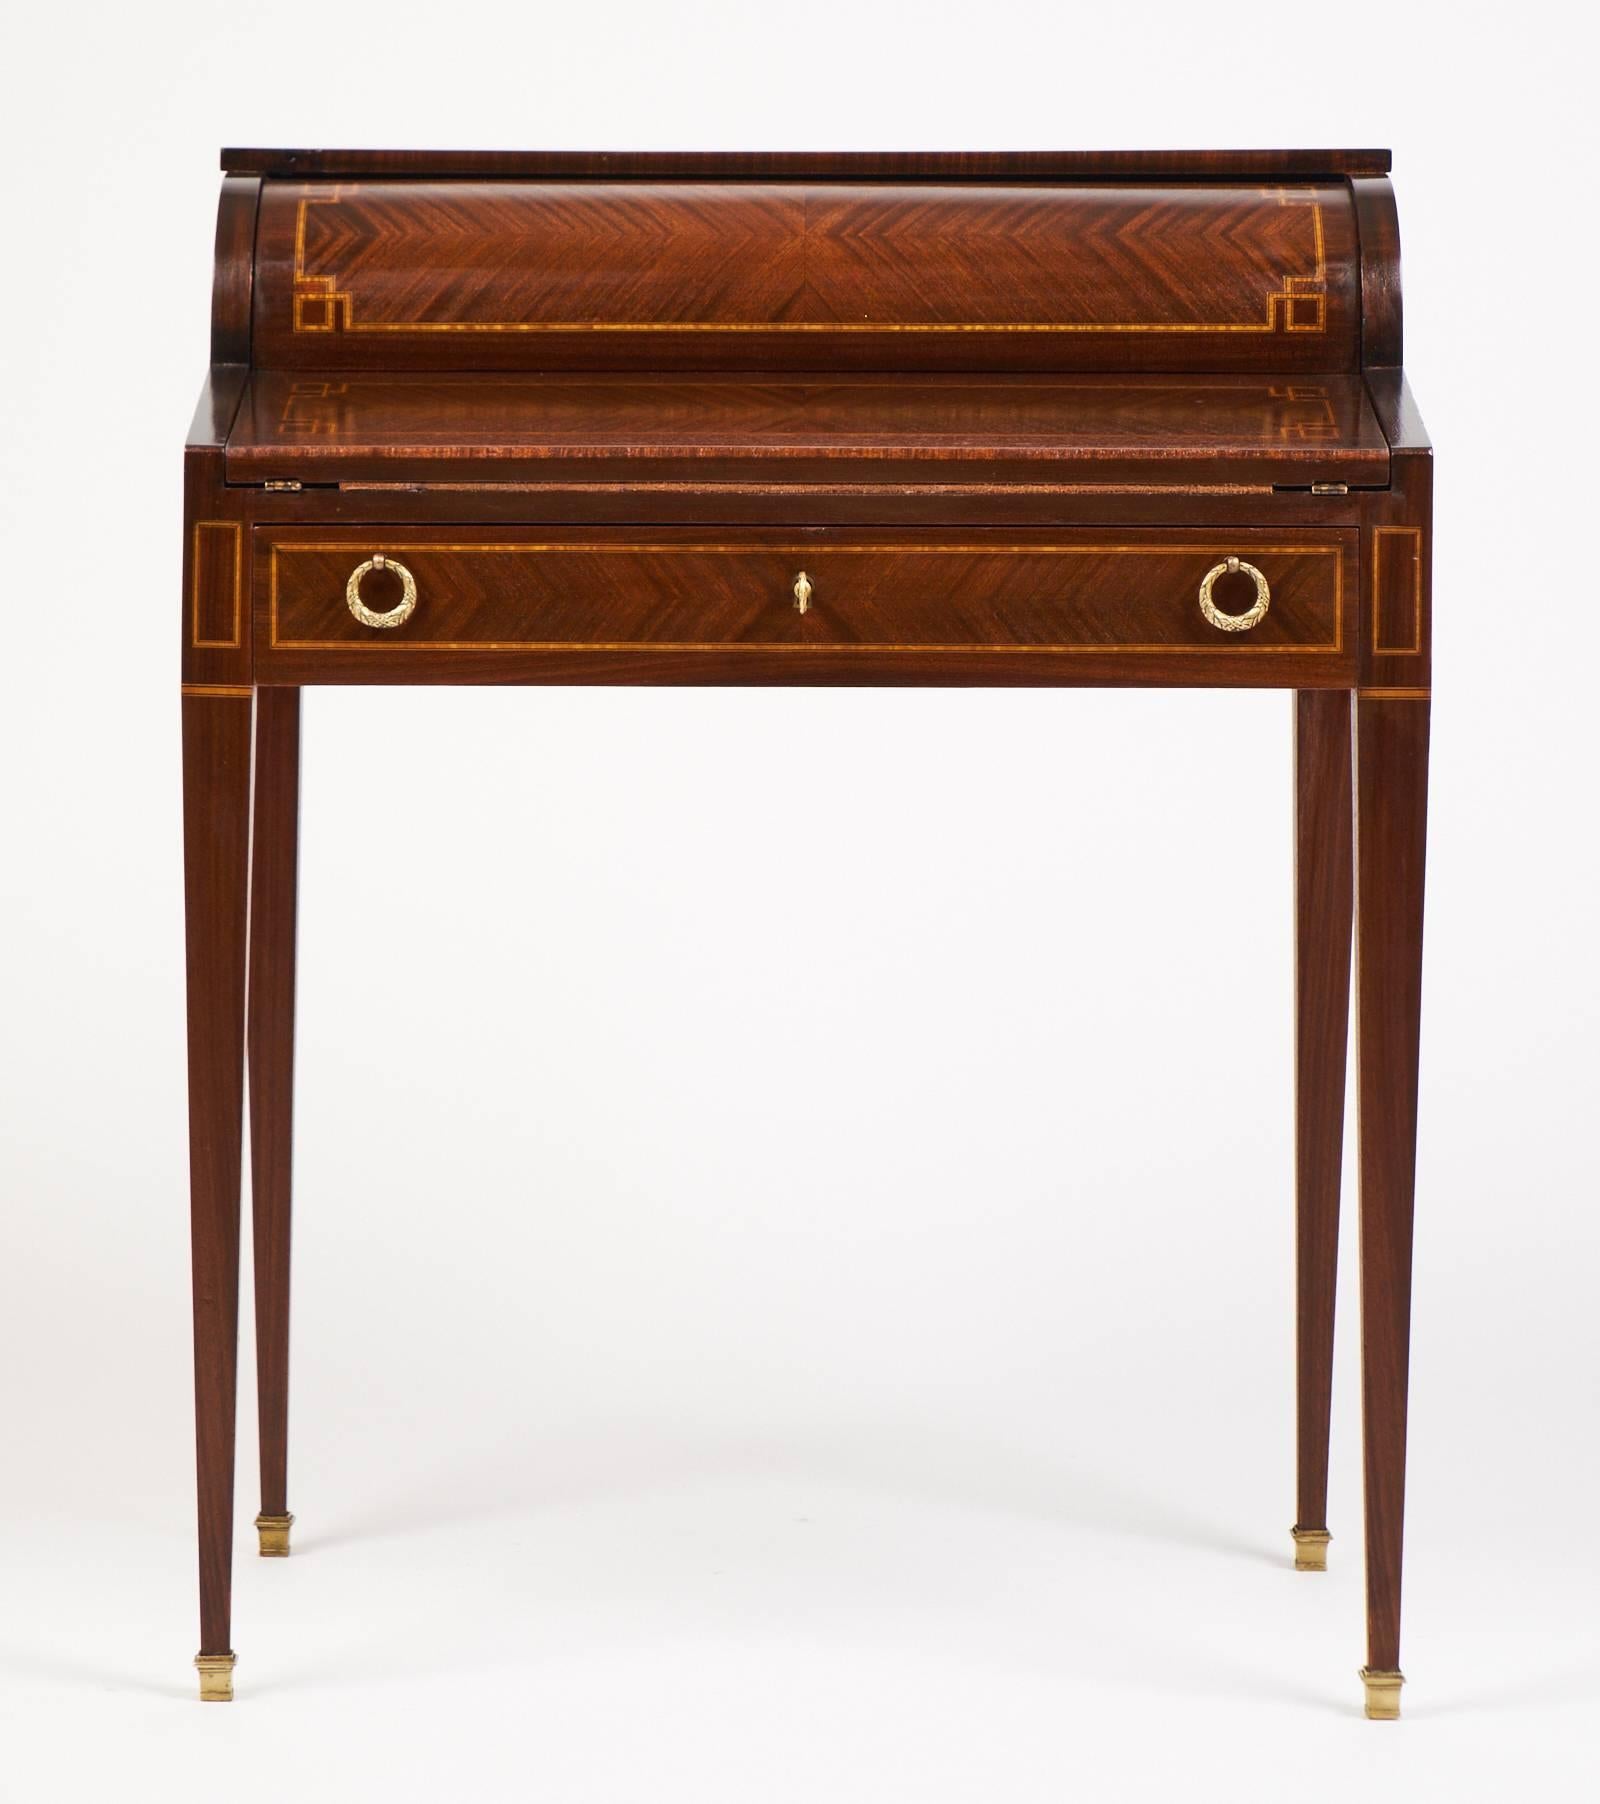 Antique Louis XVI cylinder bureau, secretary desk. A retractable cylinder encloses three drawers and a leather topped writing surface with a large bottom drawer below. Tapered legs with polished brass capped feet, original hardware, lock and key. A